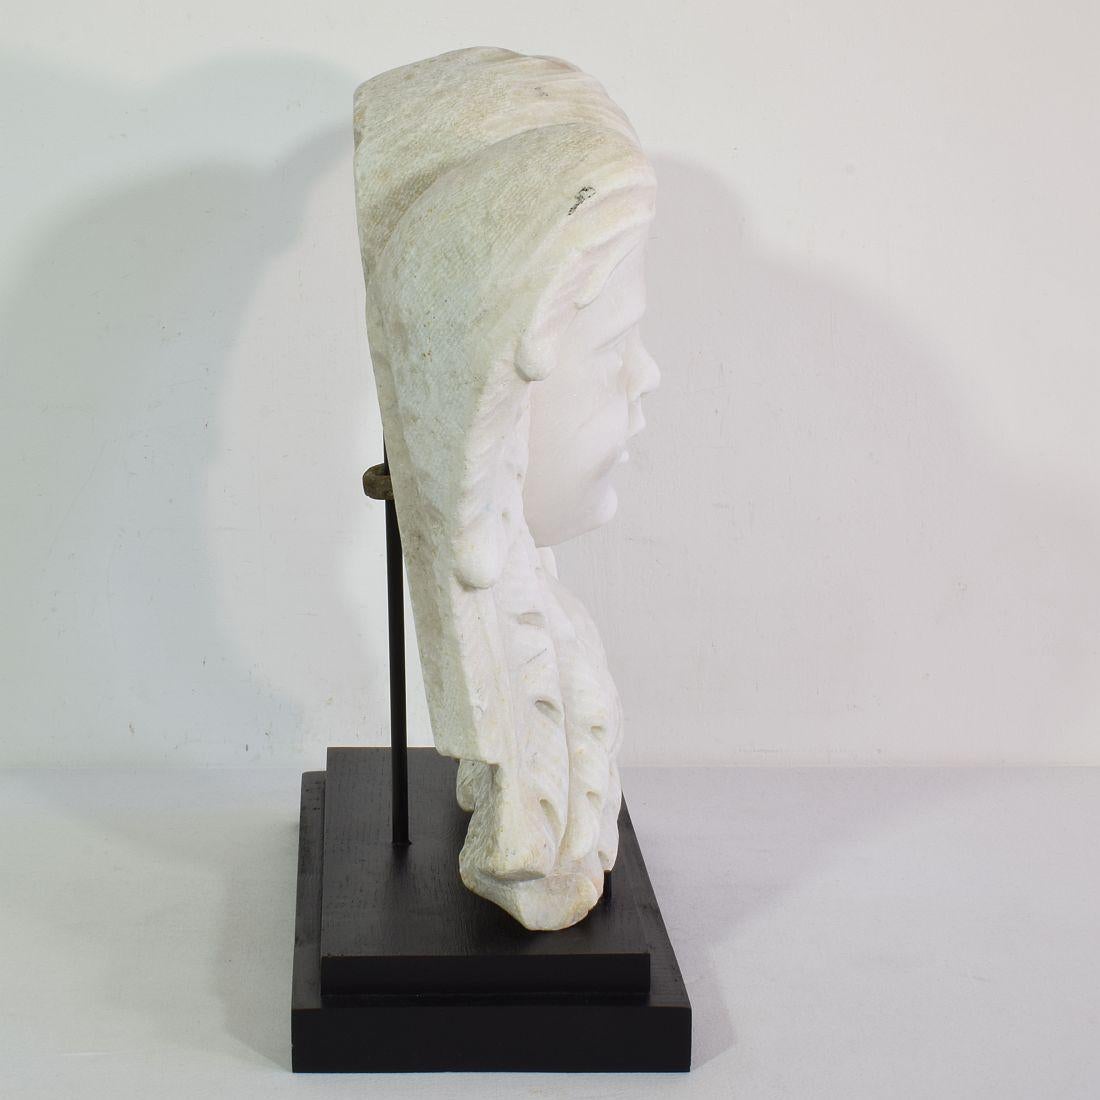 Hand-Carved Italian, 17th / 18th Century Carved White Marble Winged Angel Head Ornament For Sale